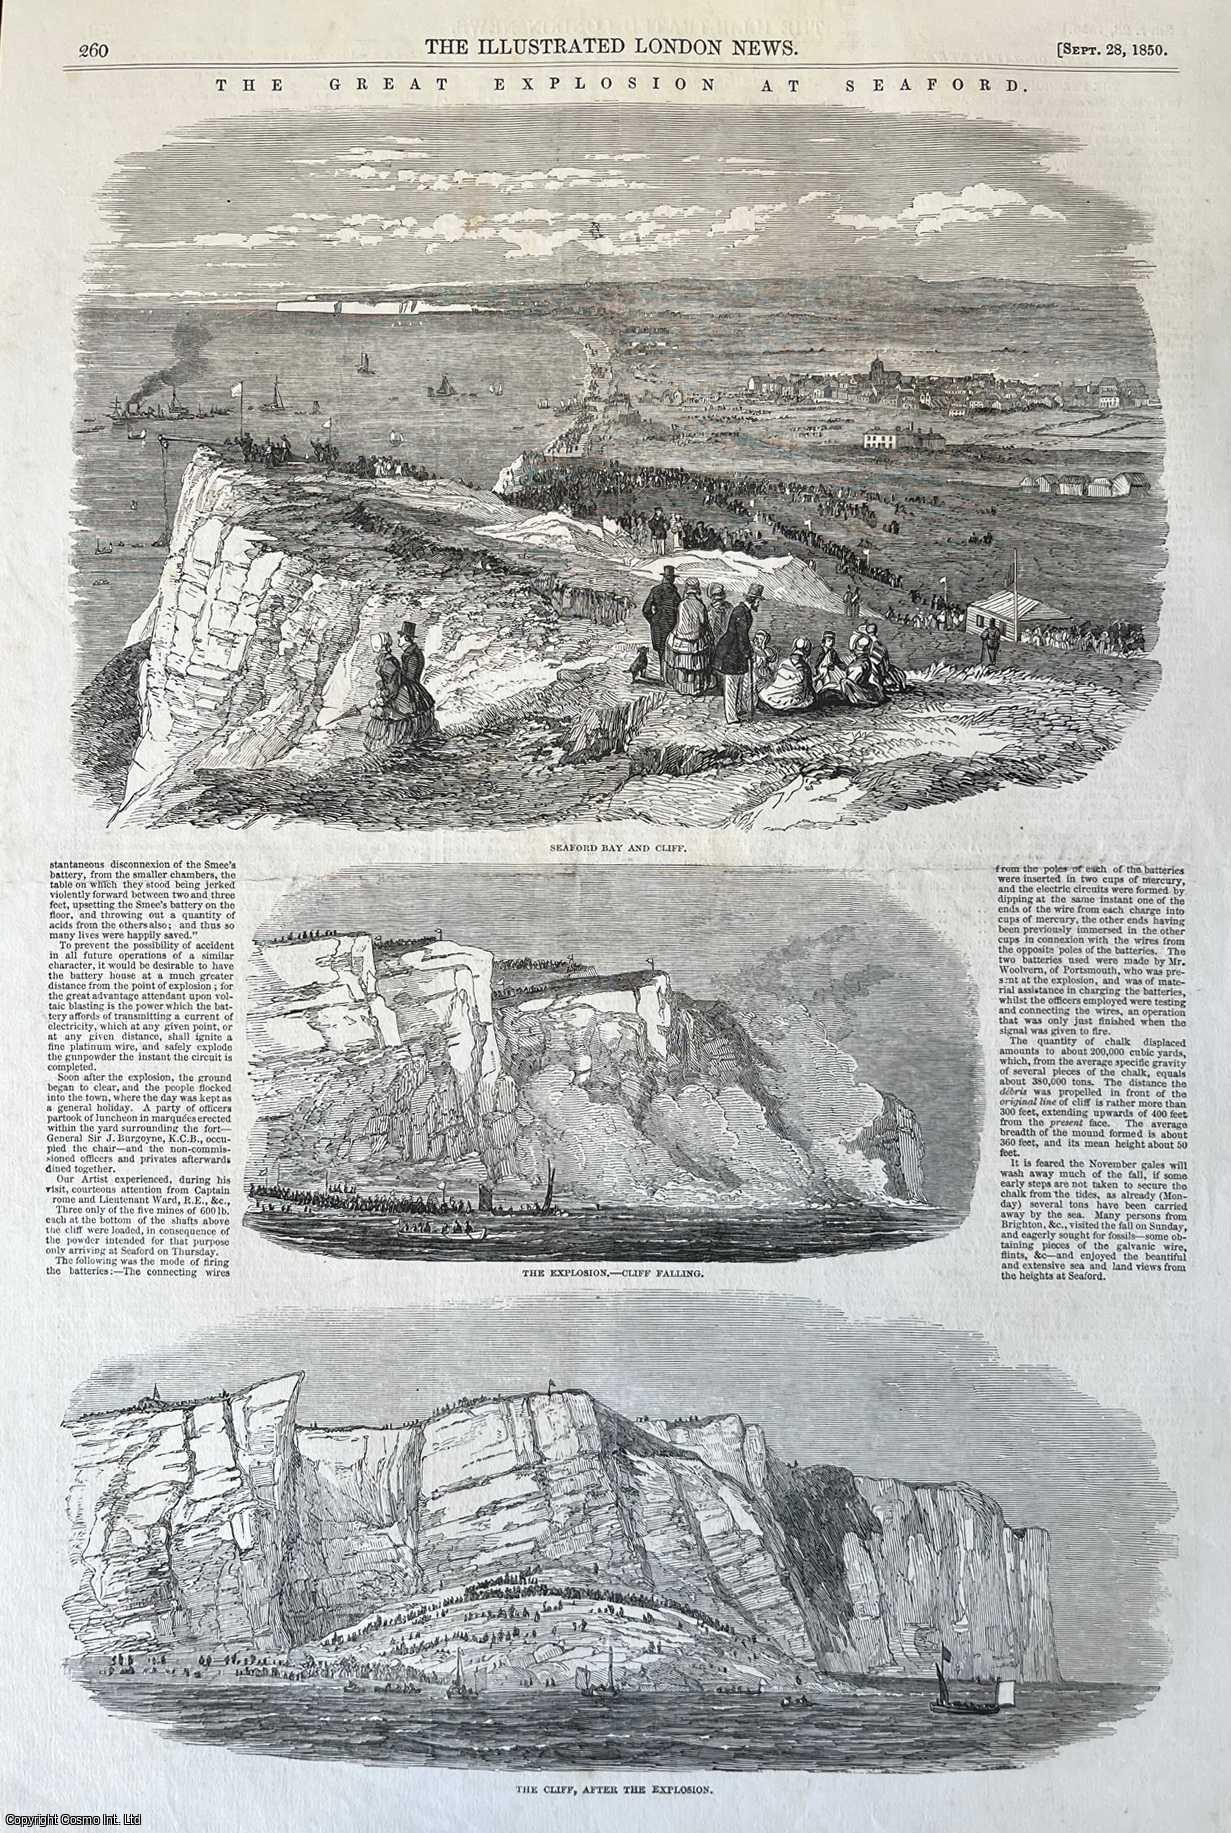 CINQUE PORTS - The Great Explosion at Seaford, Chalk Blasting the Cliff. An original print from the Illustrated London News, 1850.